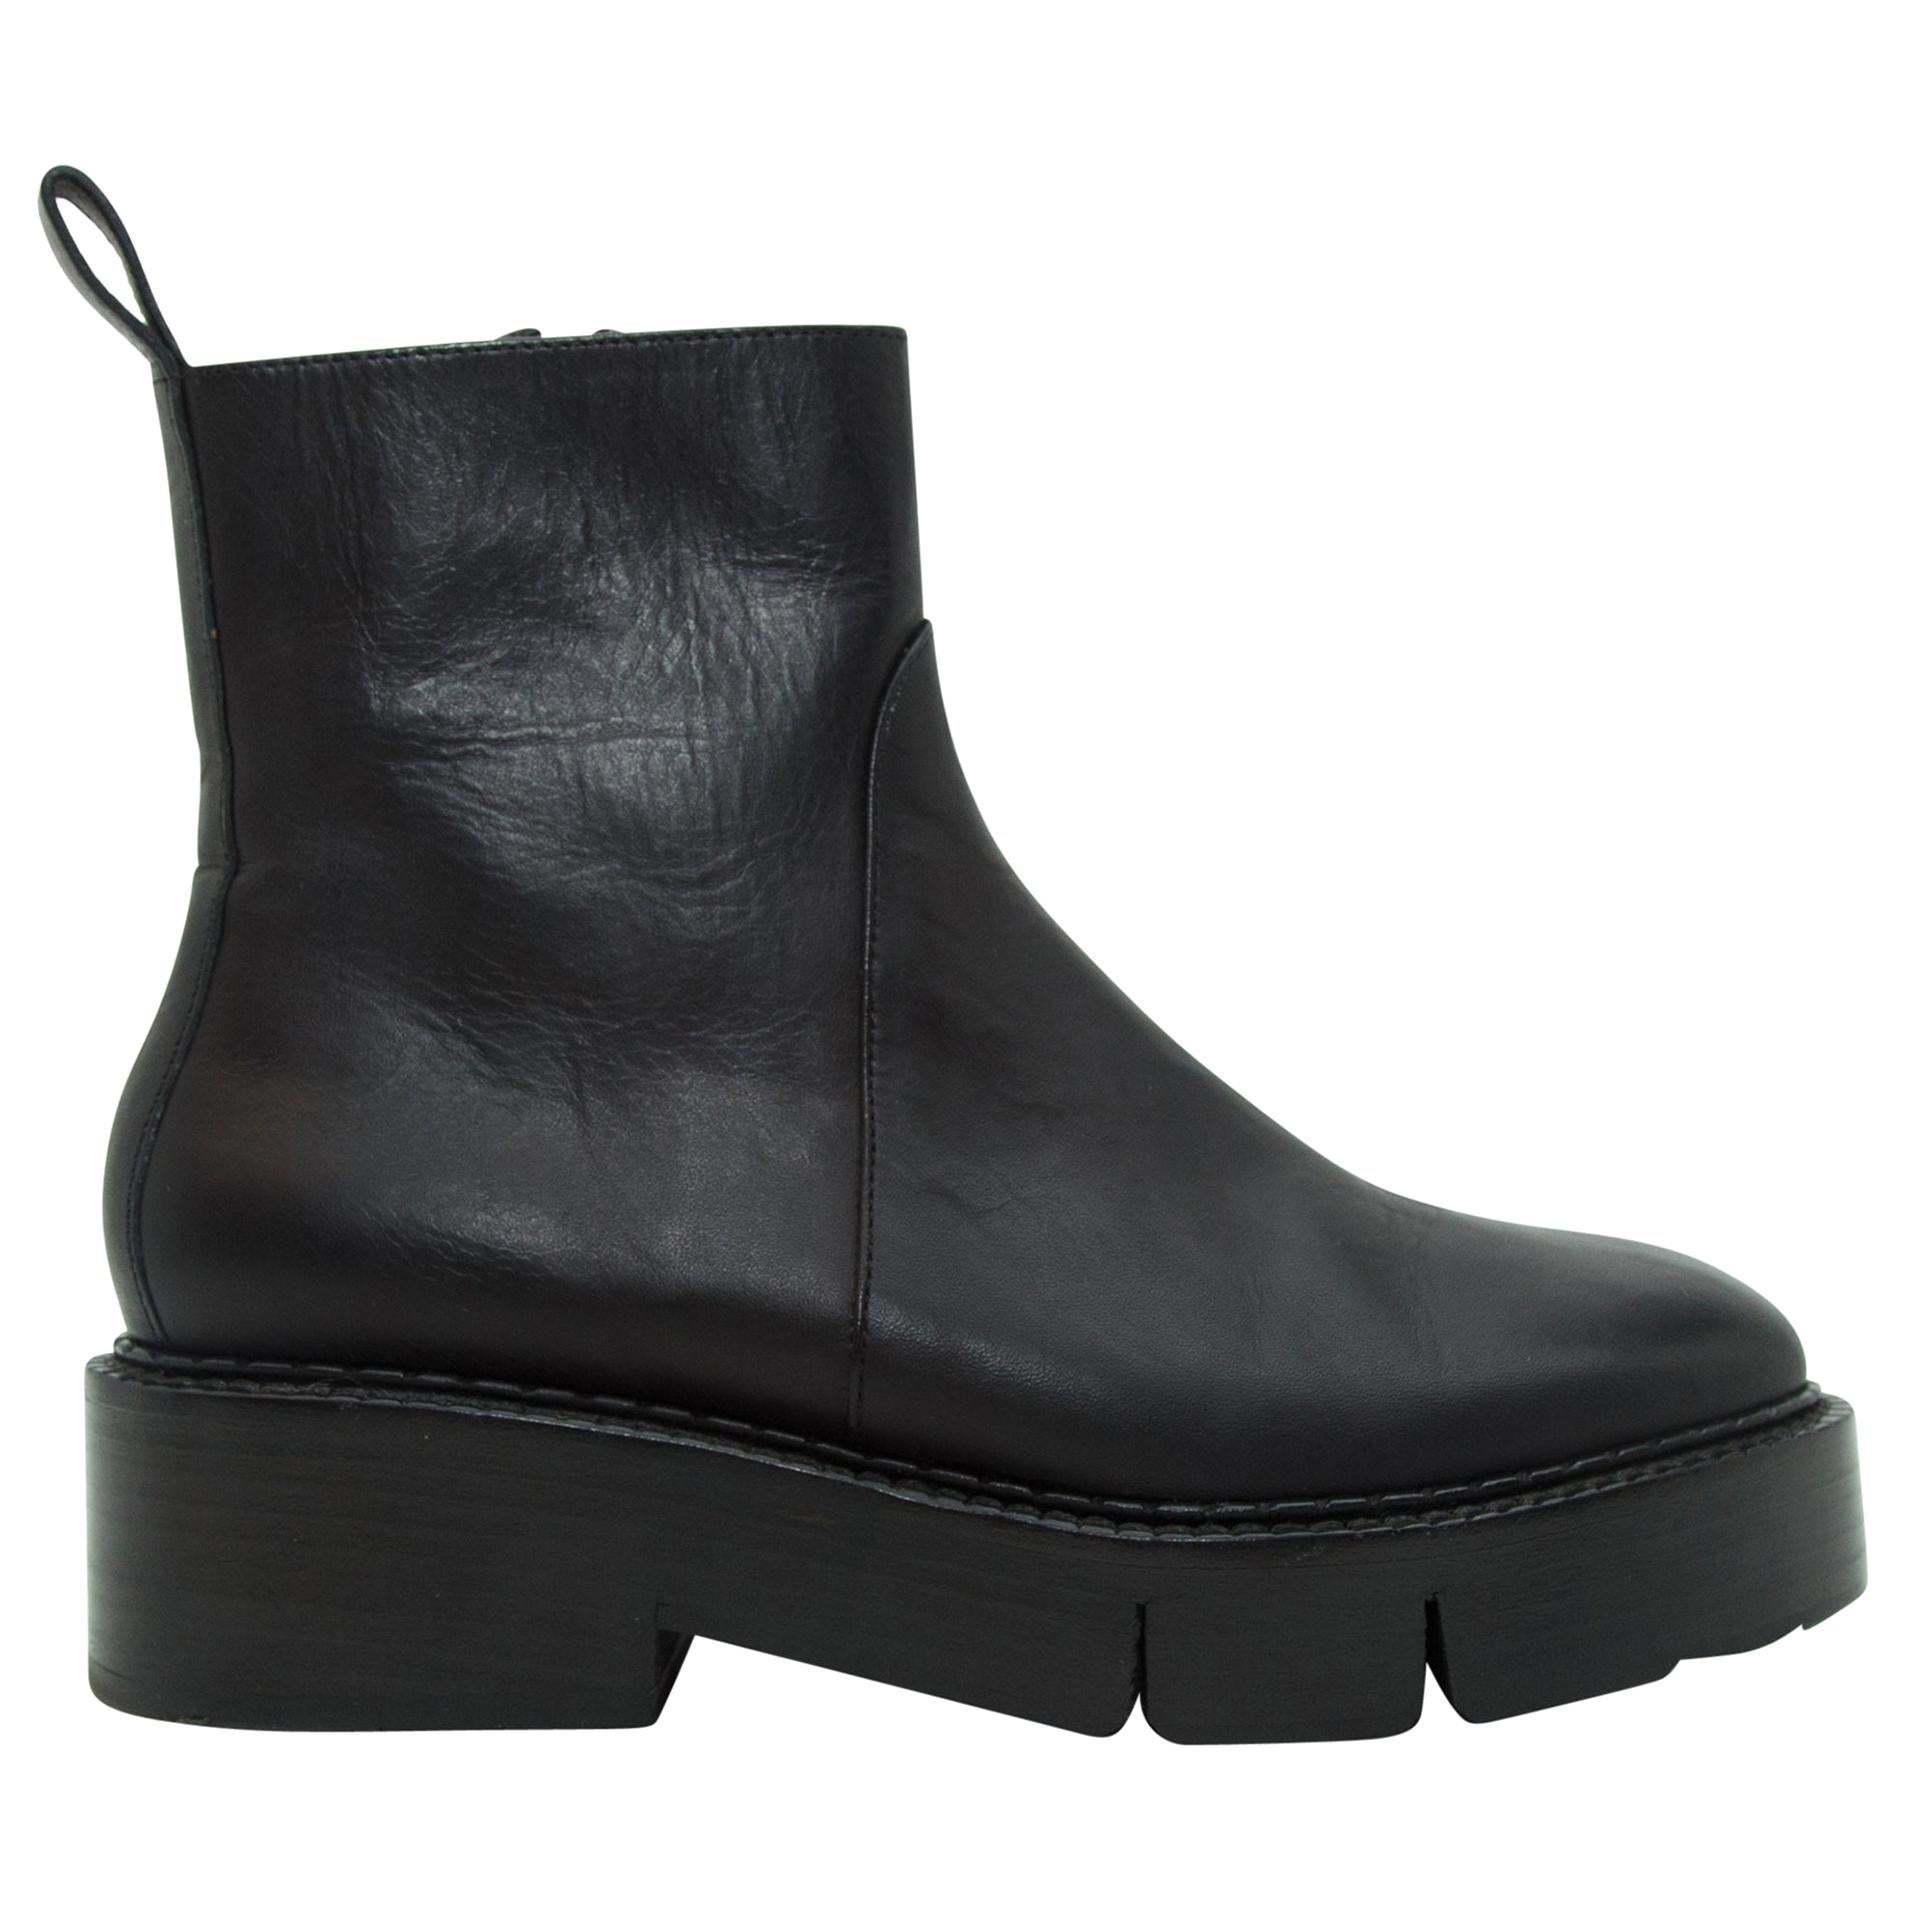 Robert Clergerie Black Leather Ankle Boots